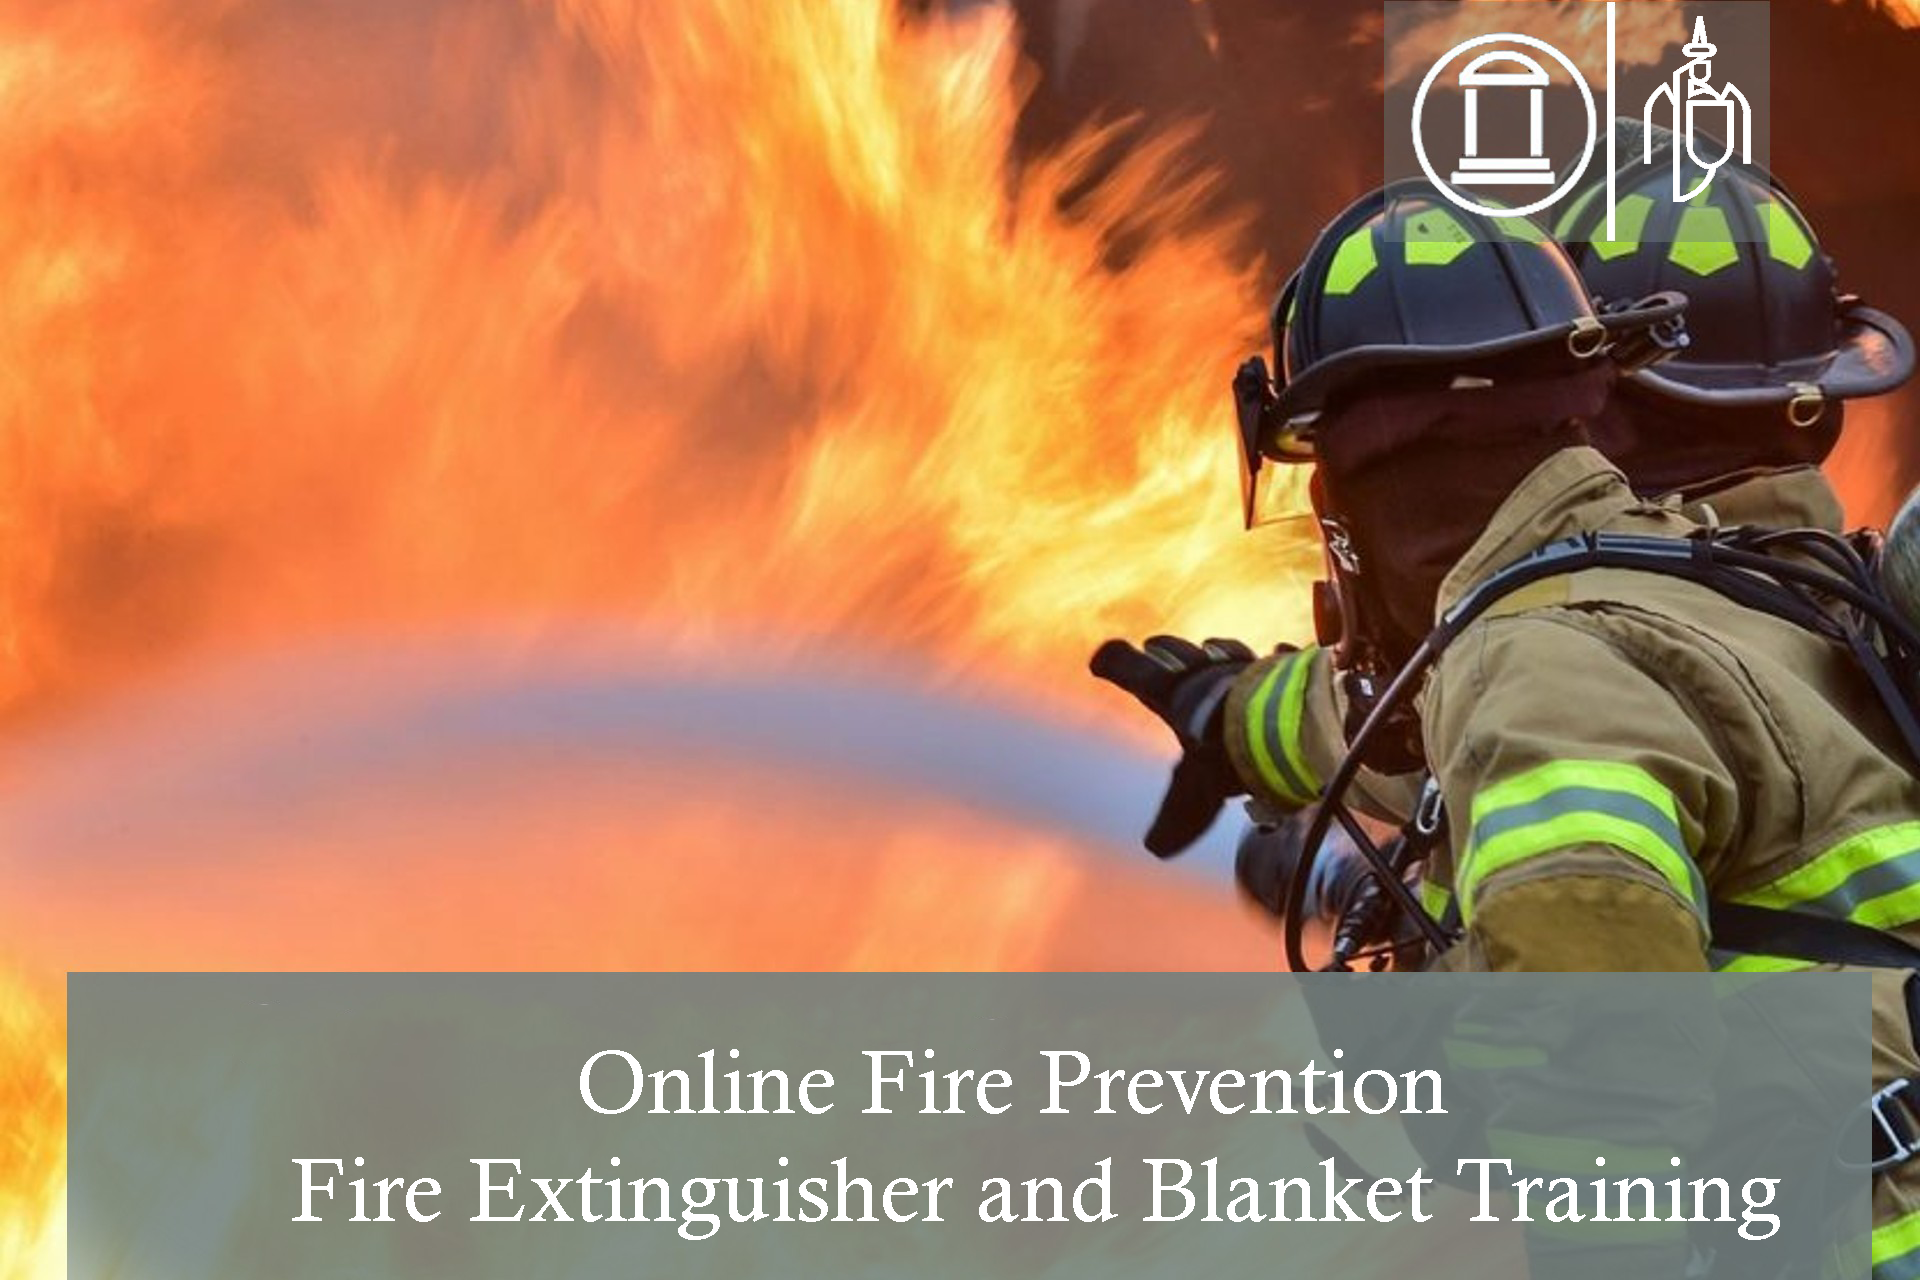 Online Fire Prevention &amp; Fire Extinguisher and Blanket Training